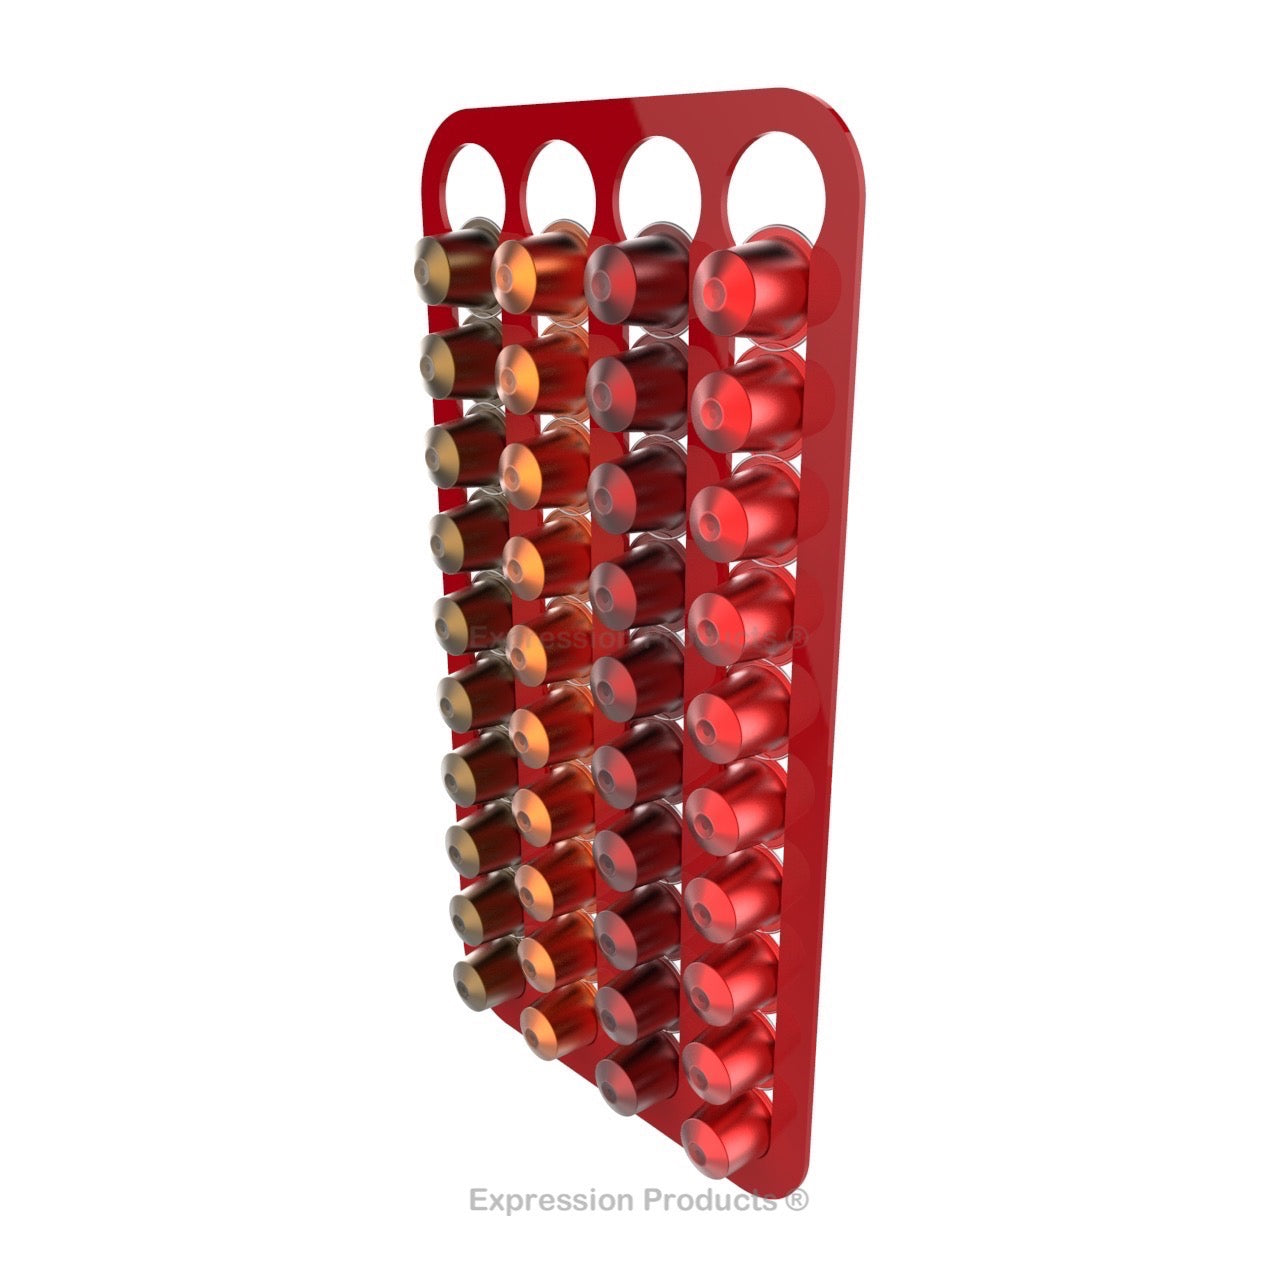 Magnetic Nespresso Original Line coffee pod holder shown in red holding 40 pods